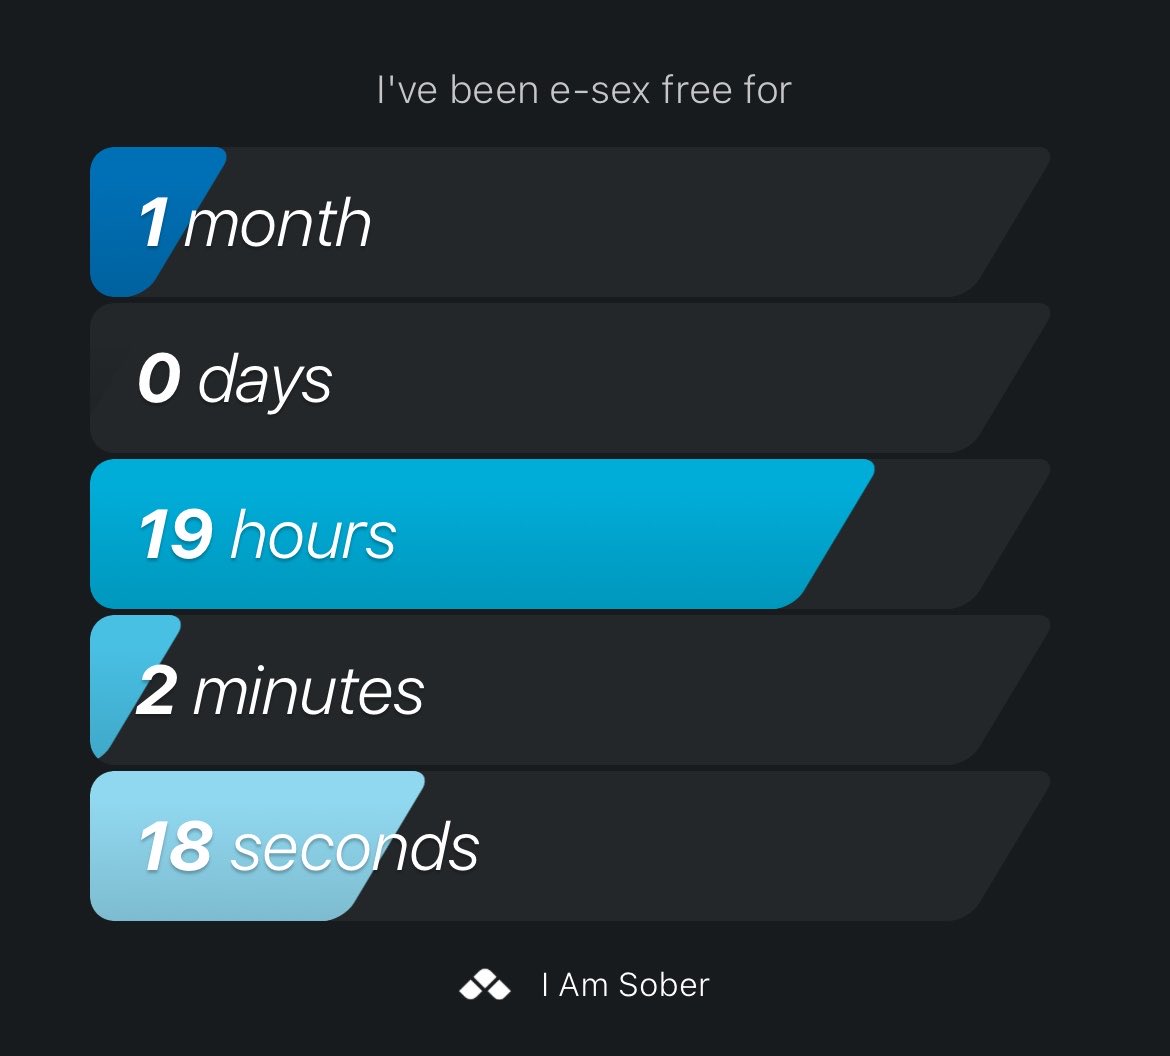 I've been e-sex free for 1 month #iamsober